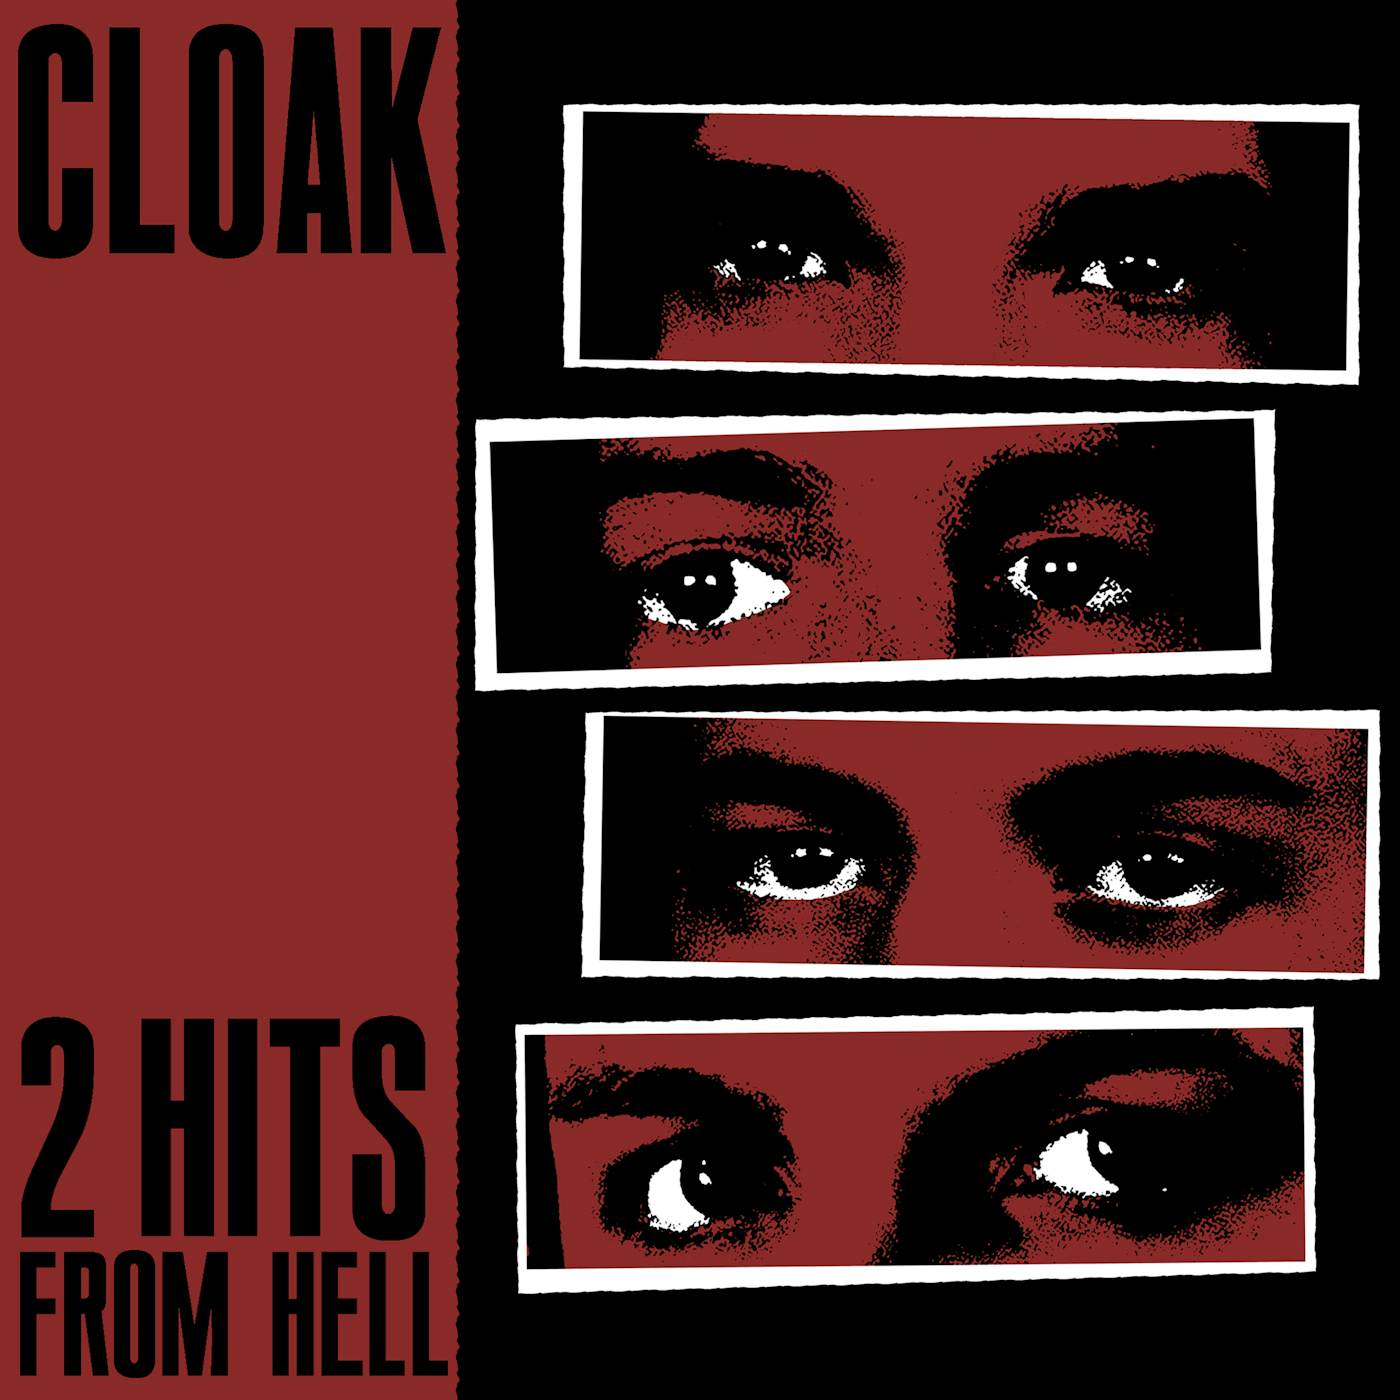 Cloak 2 Hits From Hell Vinyl Record